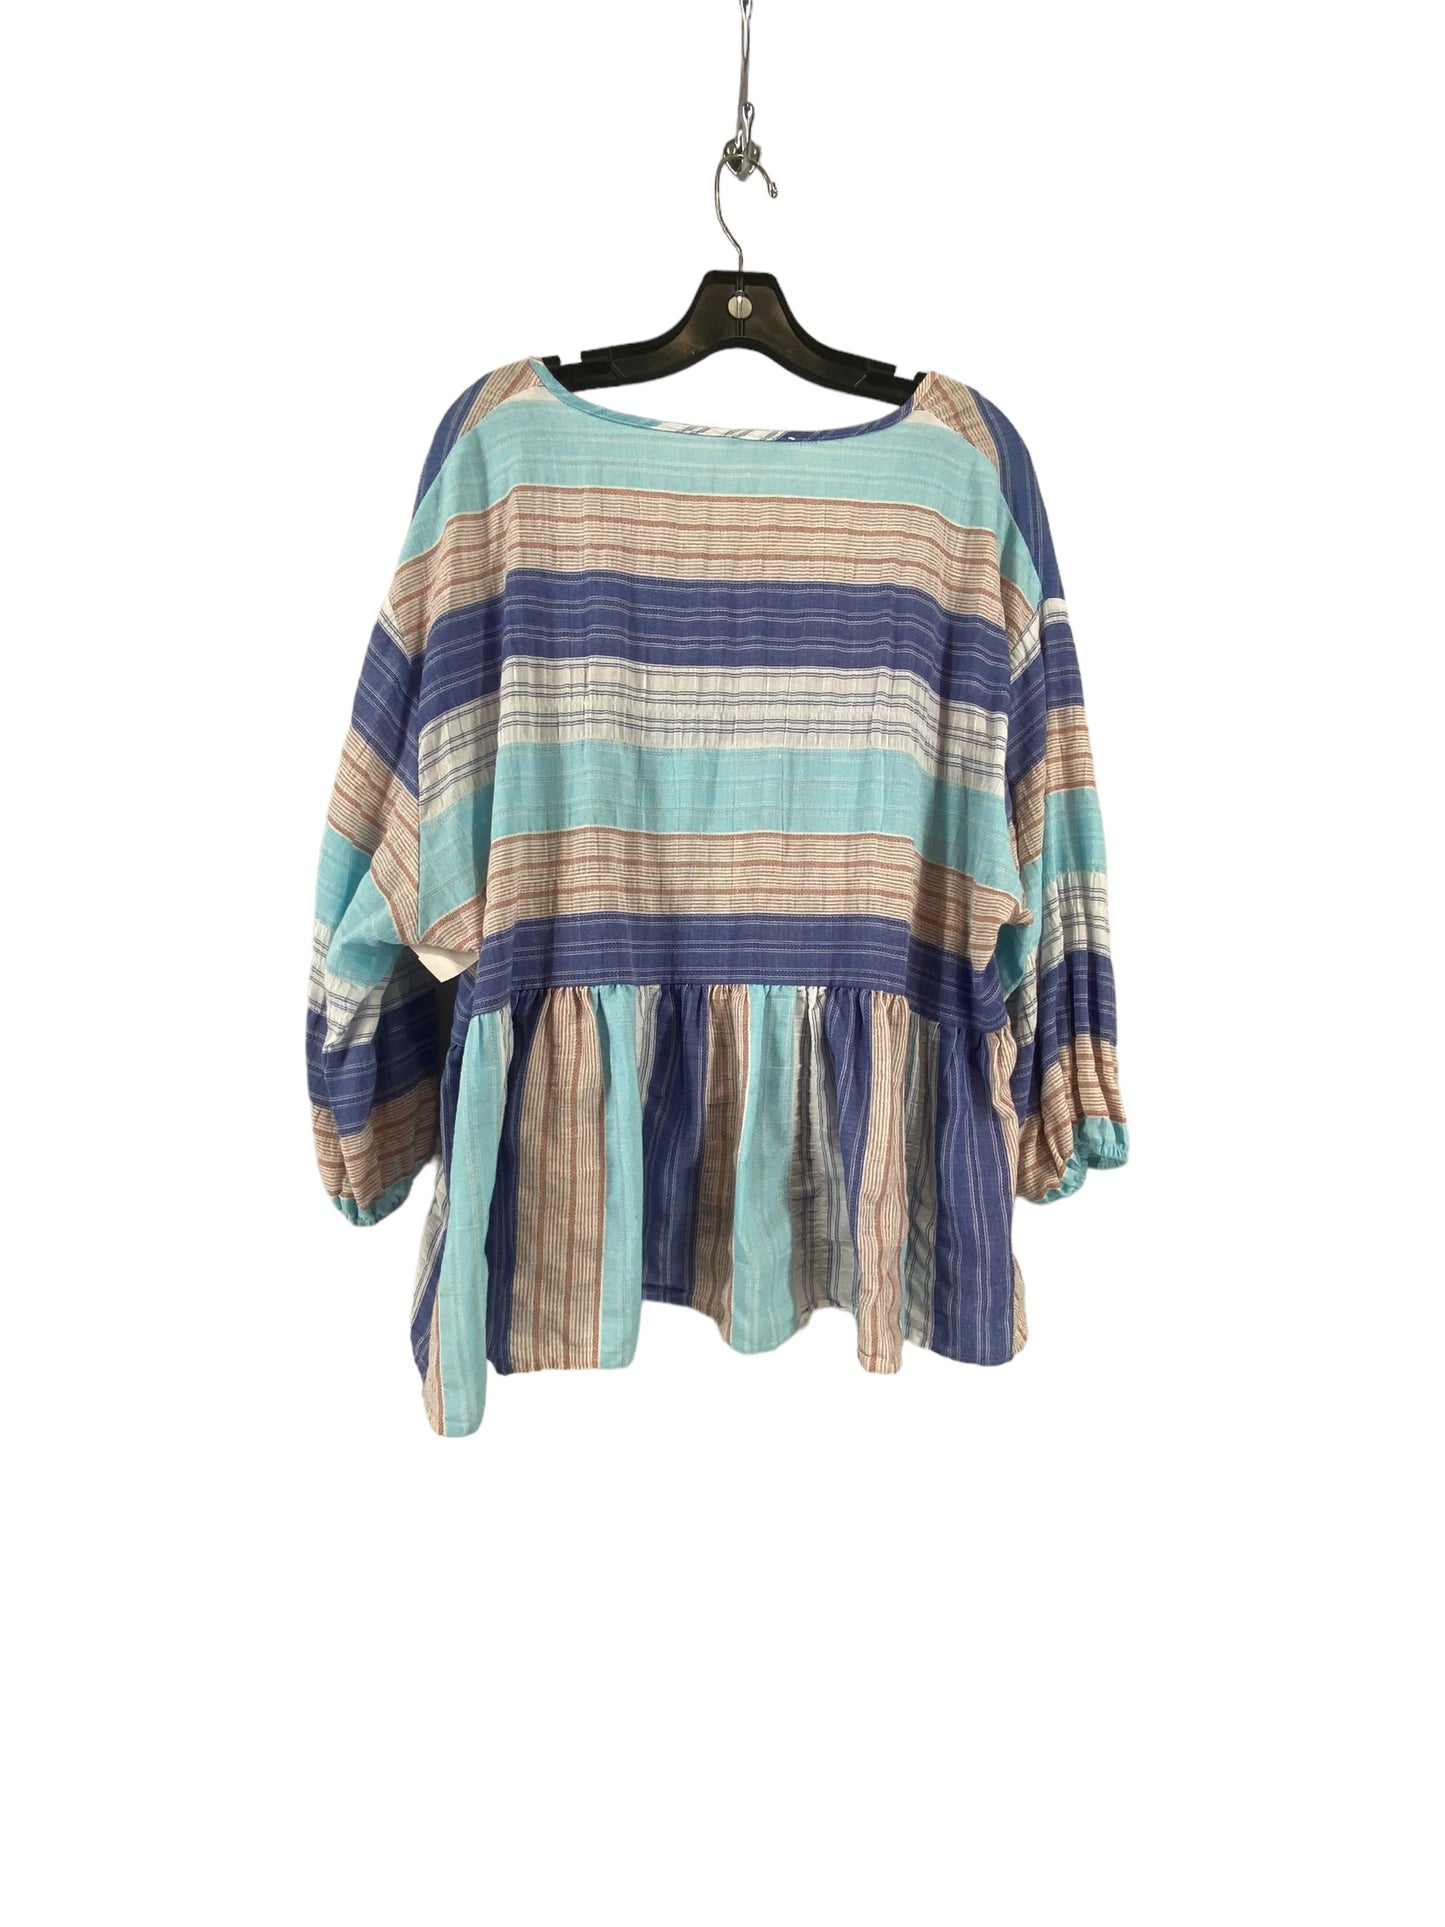 Striped Pattern Top 3/4 Sleeve Crescent Drive, Size M